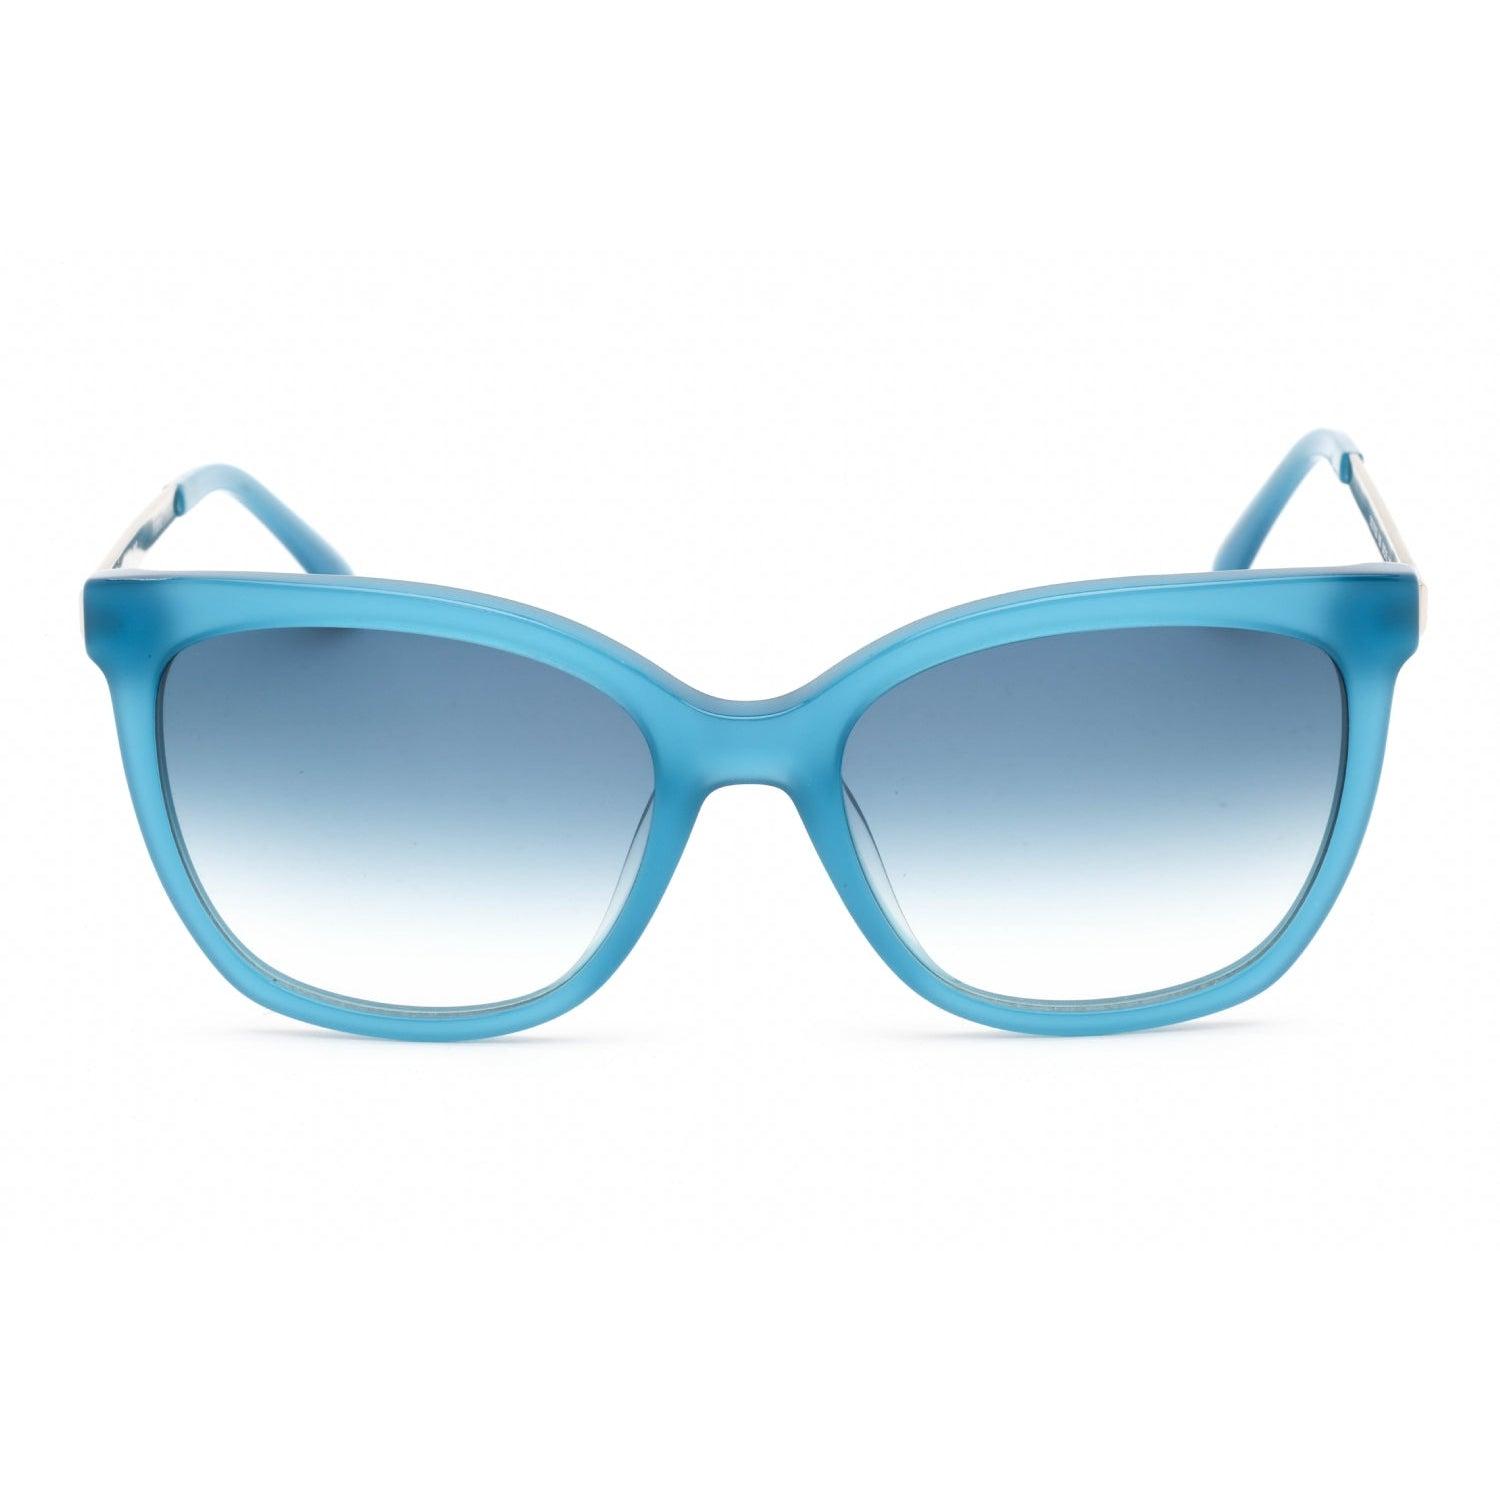 CHANEL Chanel Women's Blue and Silver Sunglasses, blueblueblue